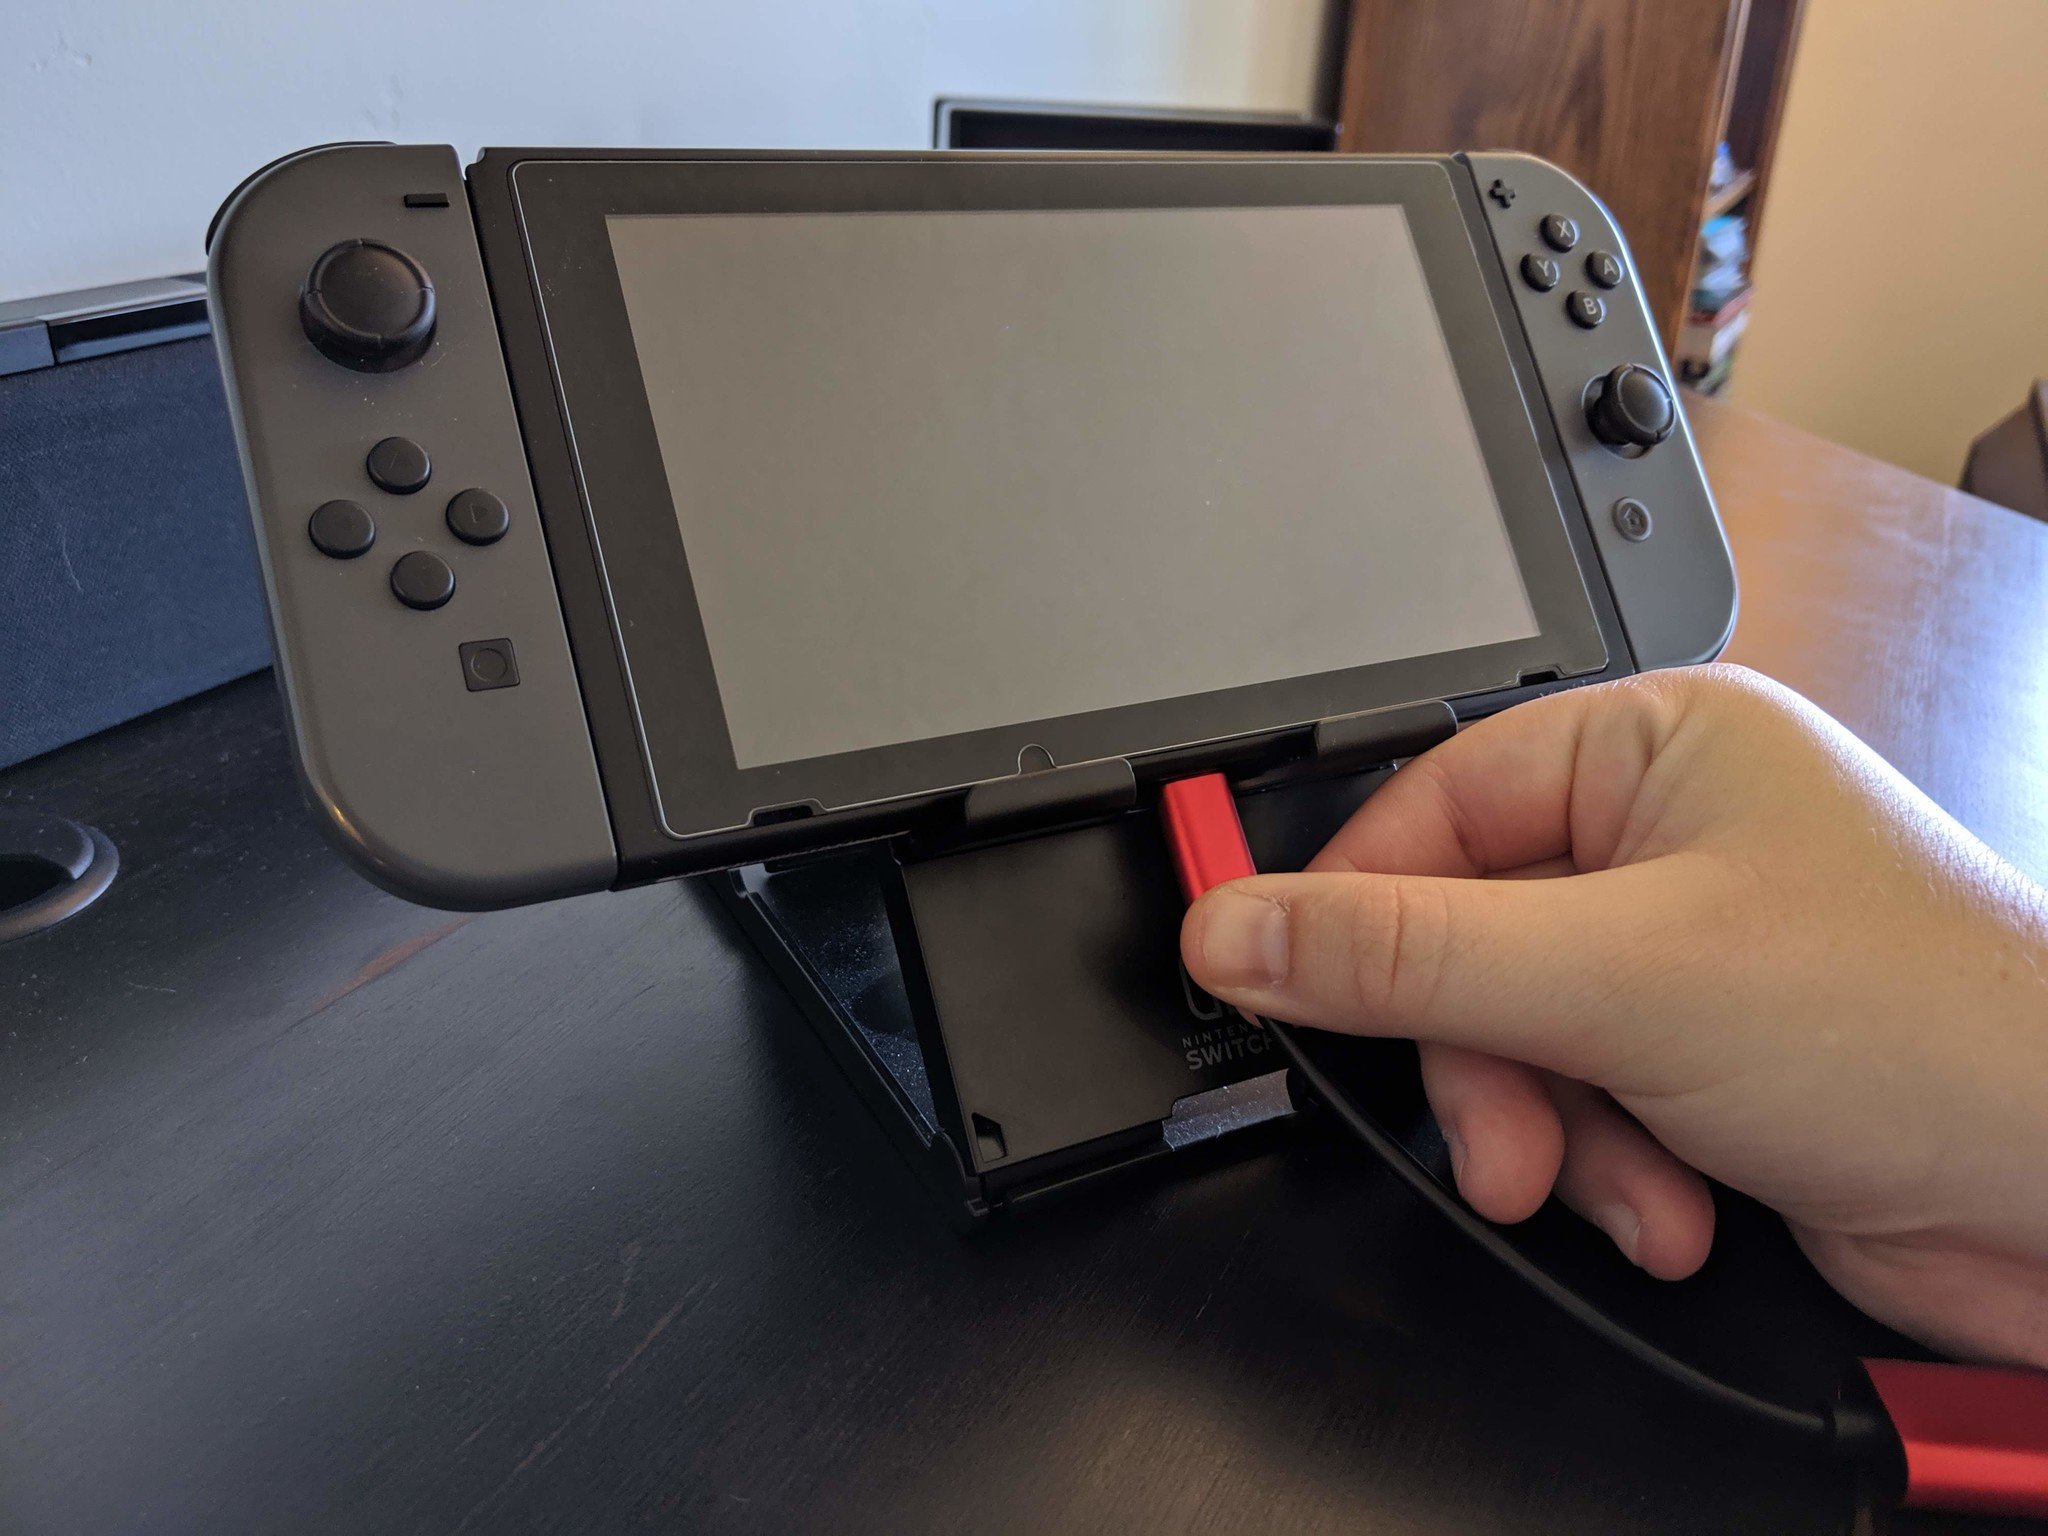 How to connect your Xbox One controller with the Nintendo Switch in wireless tabletop mode step one: Insert the USB-C cable that comes with the Magic-NS Adapter into the Nintendo Switch